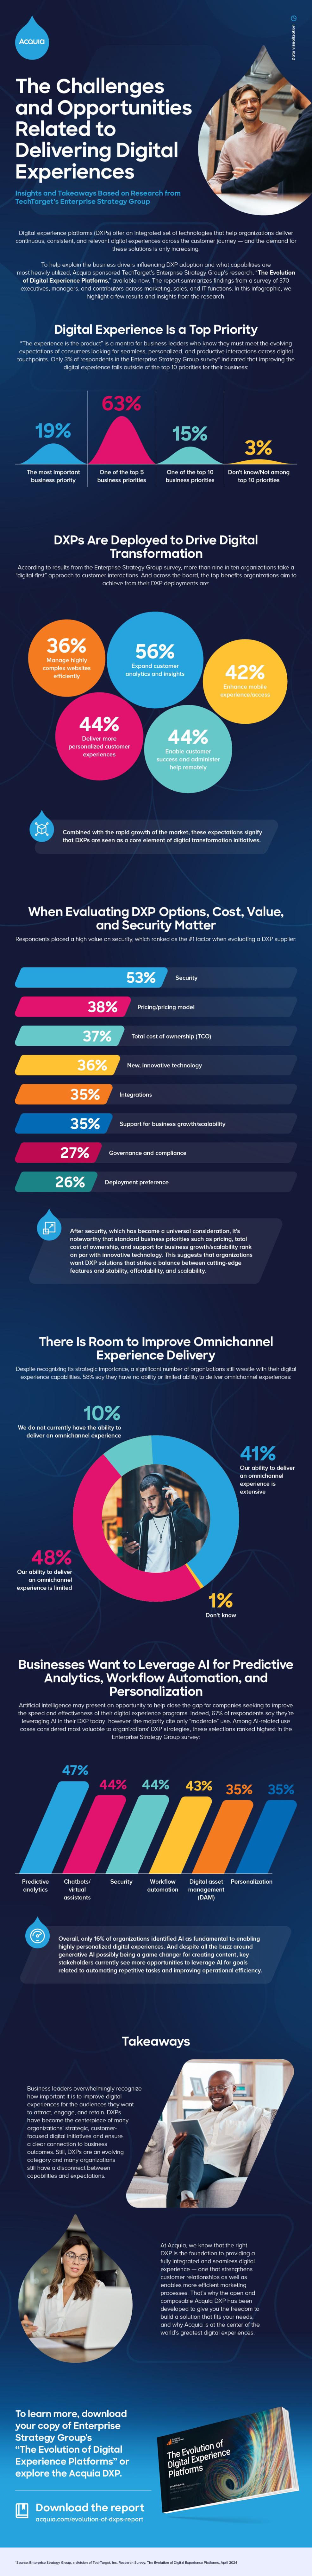 Infographic with stats on the state of the digital experience platform (DXP) market